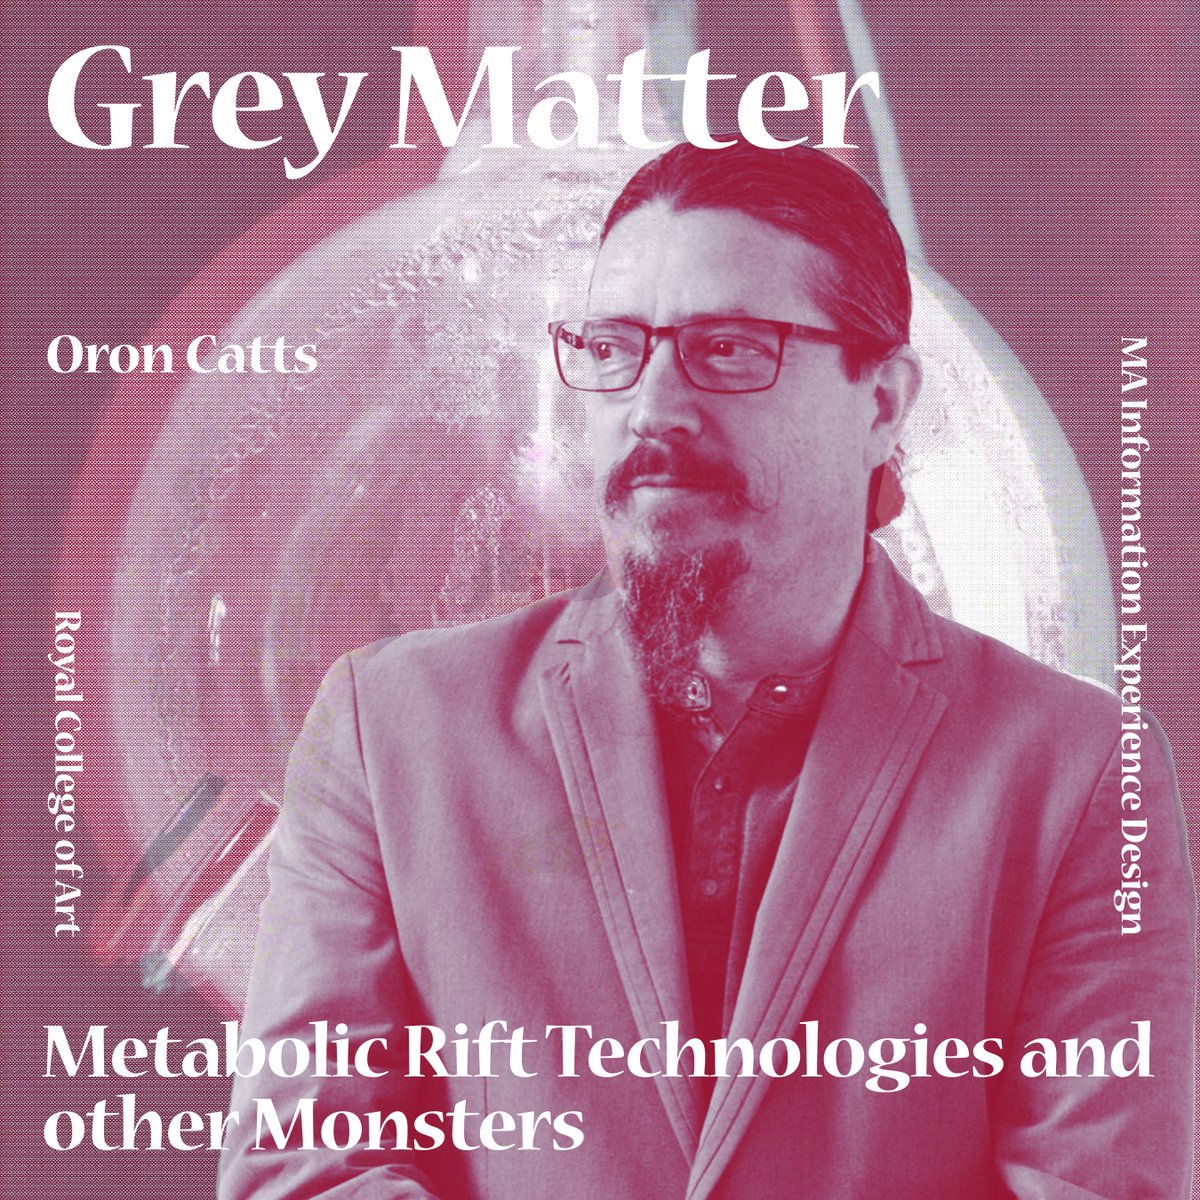 STARTS TODAY AT 10 AM New IED Lecture Series 'Grey Matter: Metabolic Rift Technologies and other Monsters' with @OronCatts Please register here: eventbrite.co.uk/e/grey-matter-…